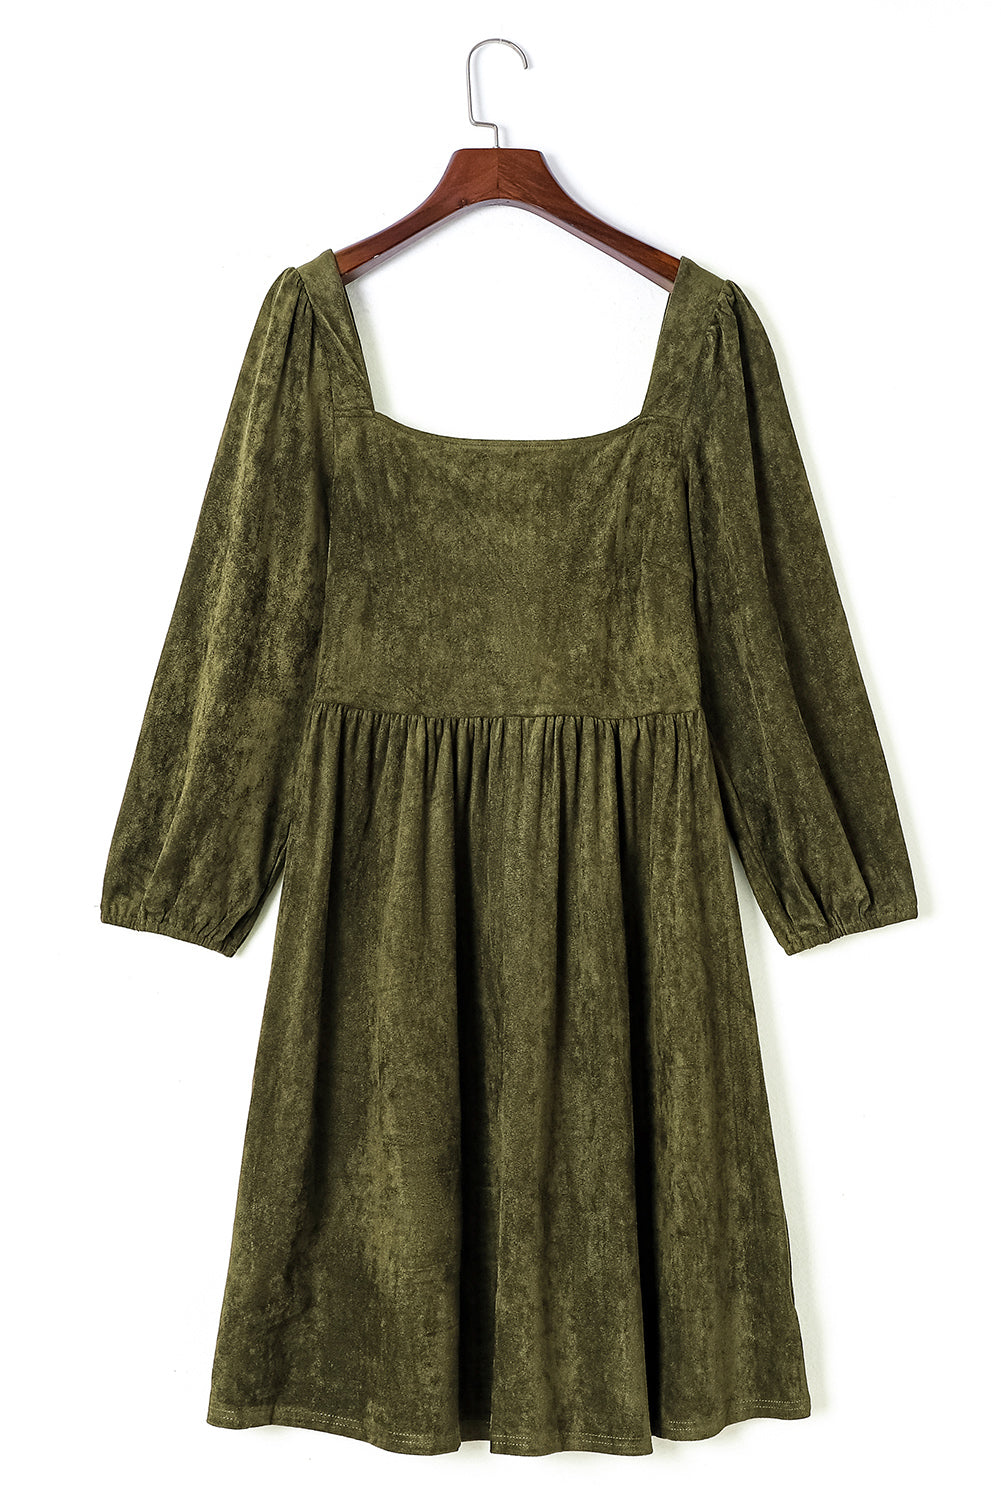 Green Washed Square Neck High Waist Flared Short Dress